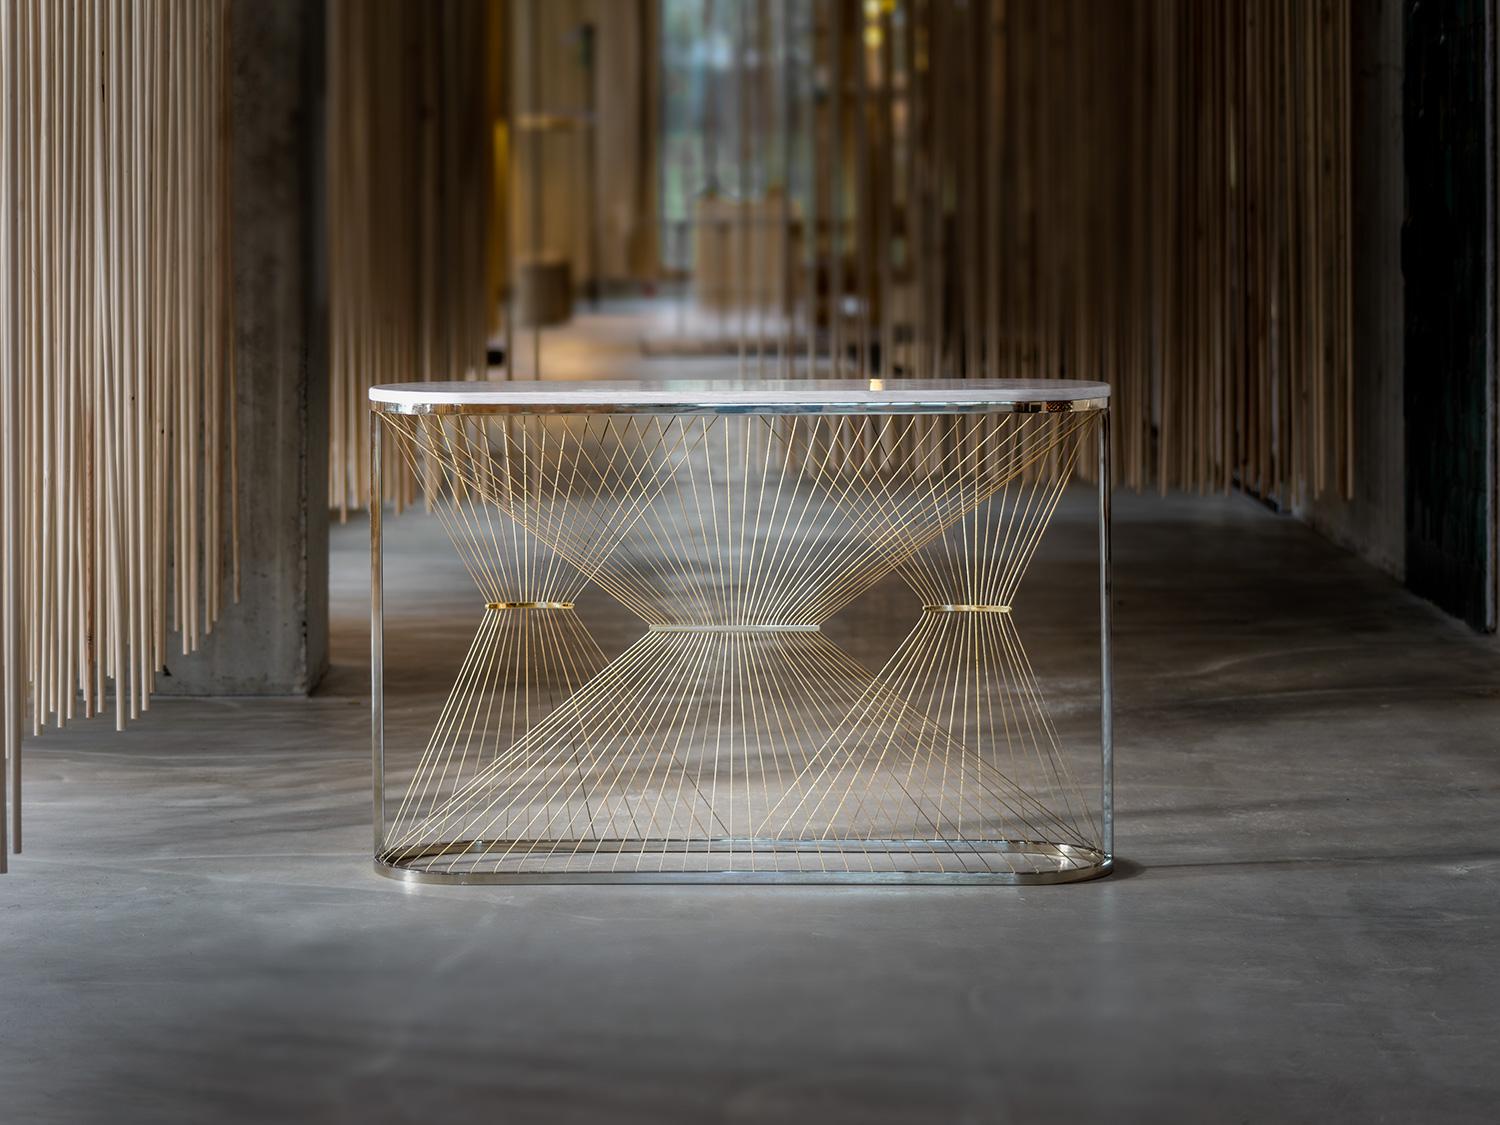 Aegis-P console table is made to order using solid stainless steel, brass plates, marble and gold steel wire. A modern contemporary design using only the finest materials and manufacturing methods; it takes 10 hours to carefully carve every part of